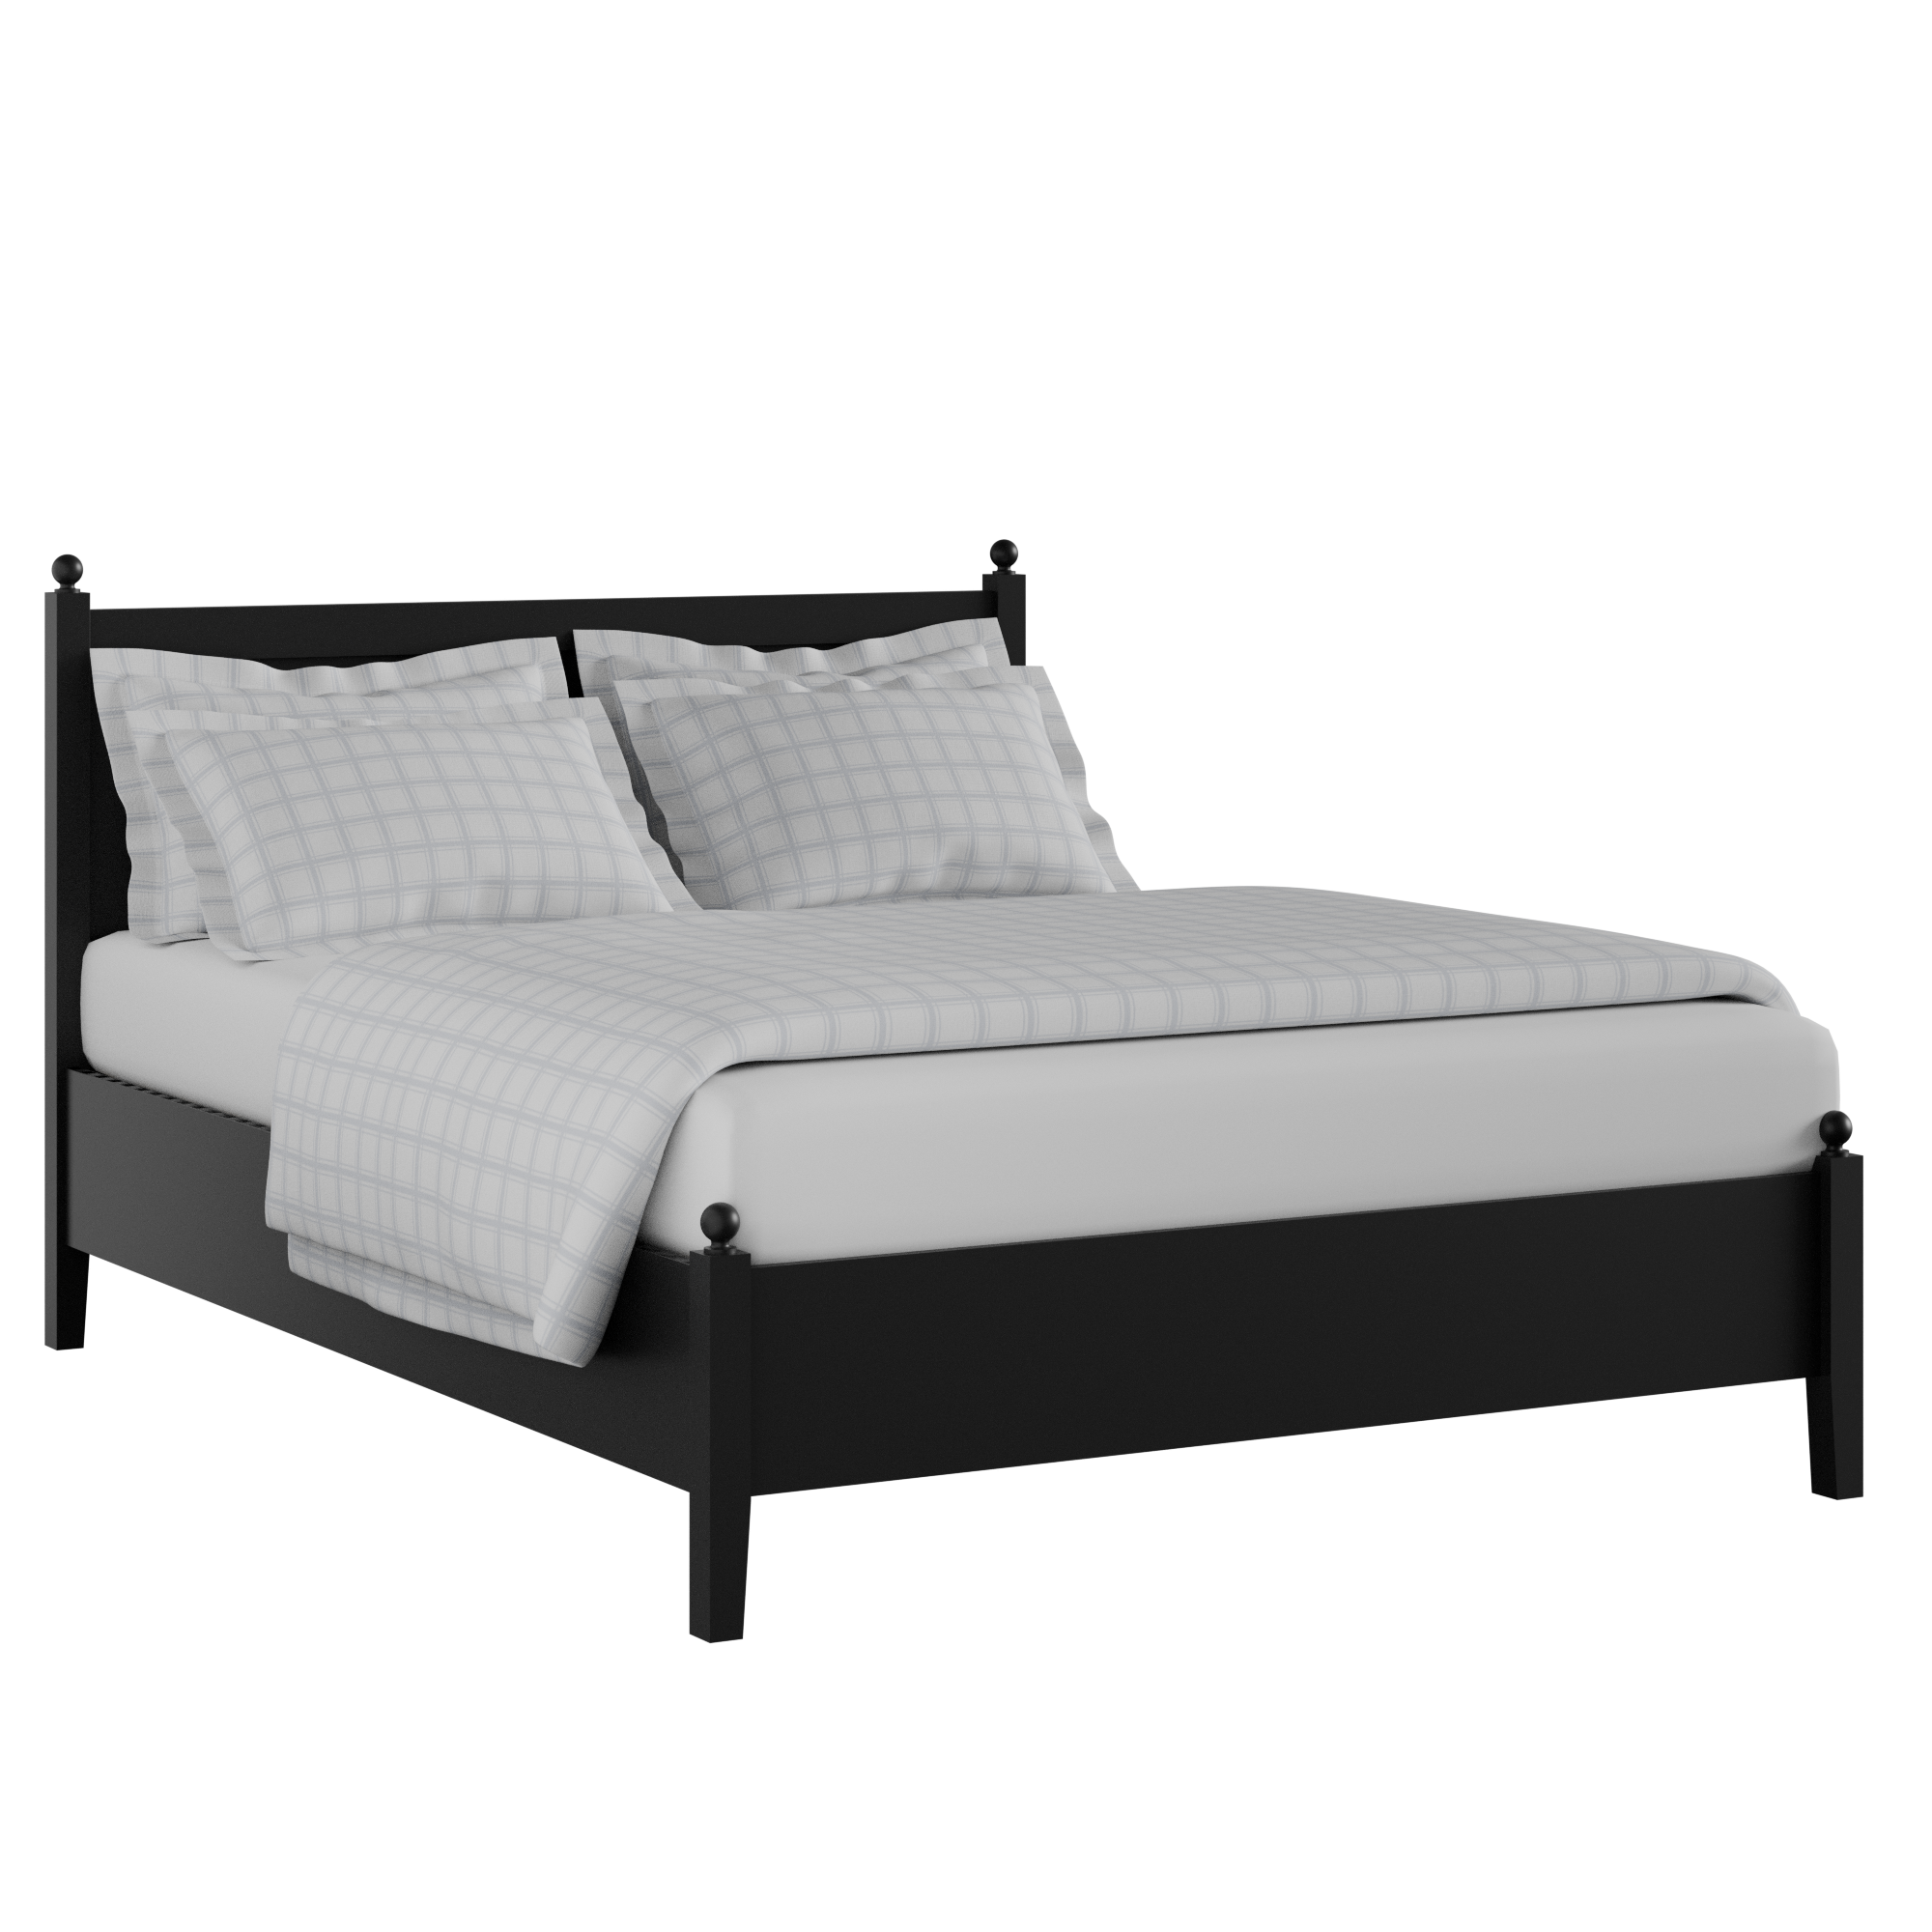 Marbella Low Footend Painted painted wood bed in black with Juno mattress